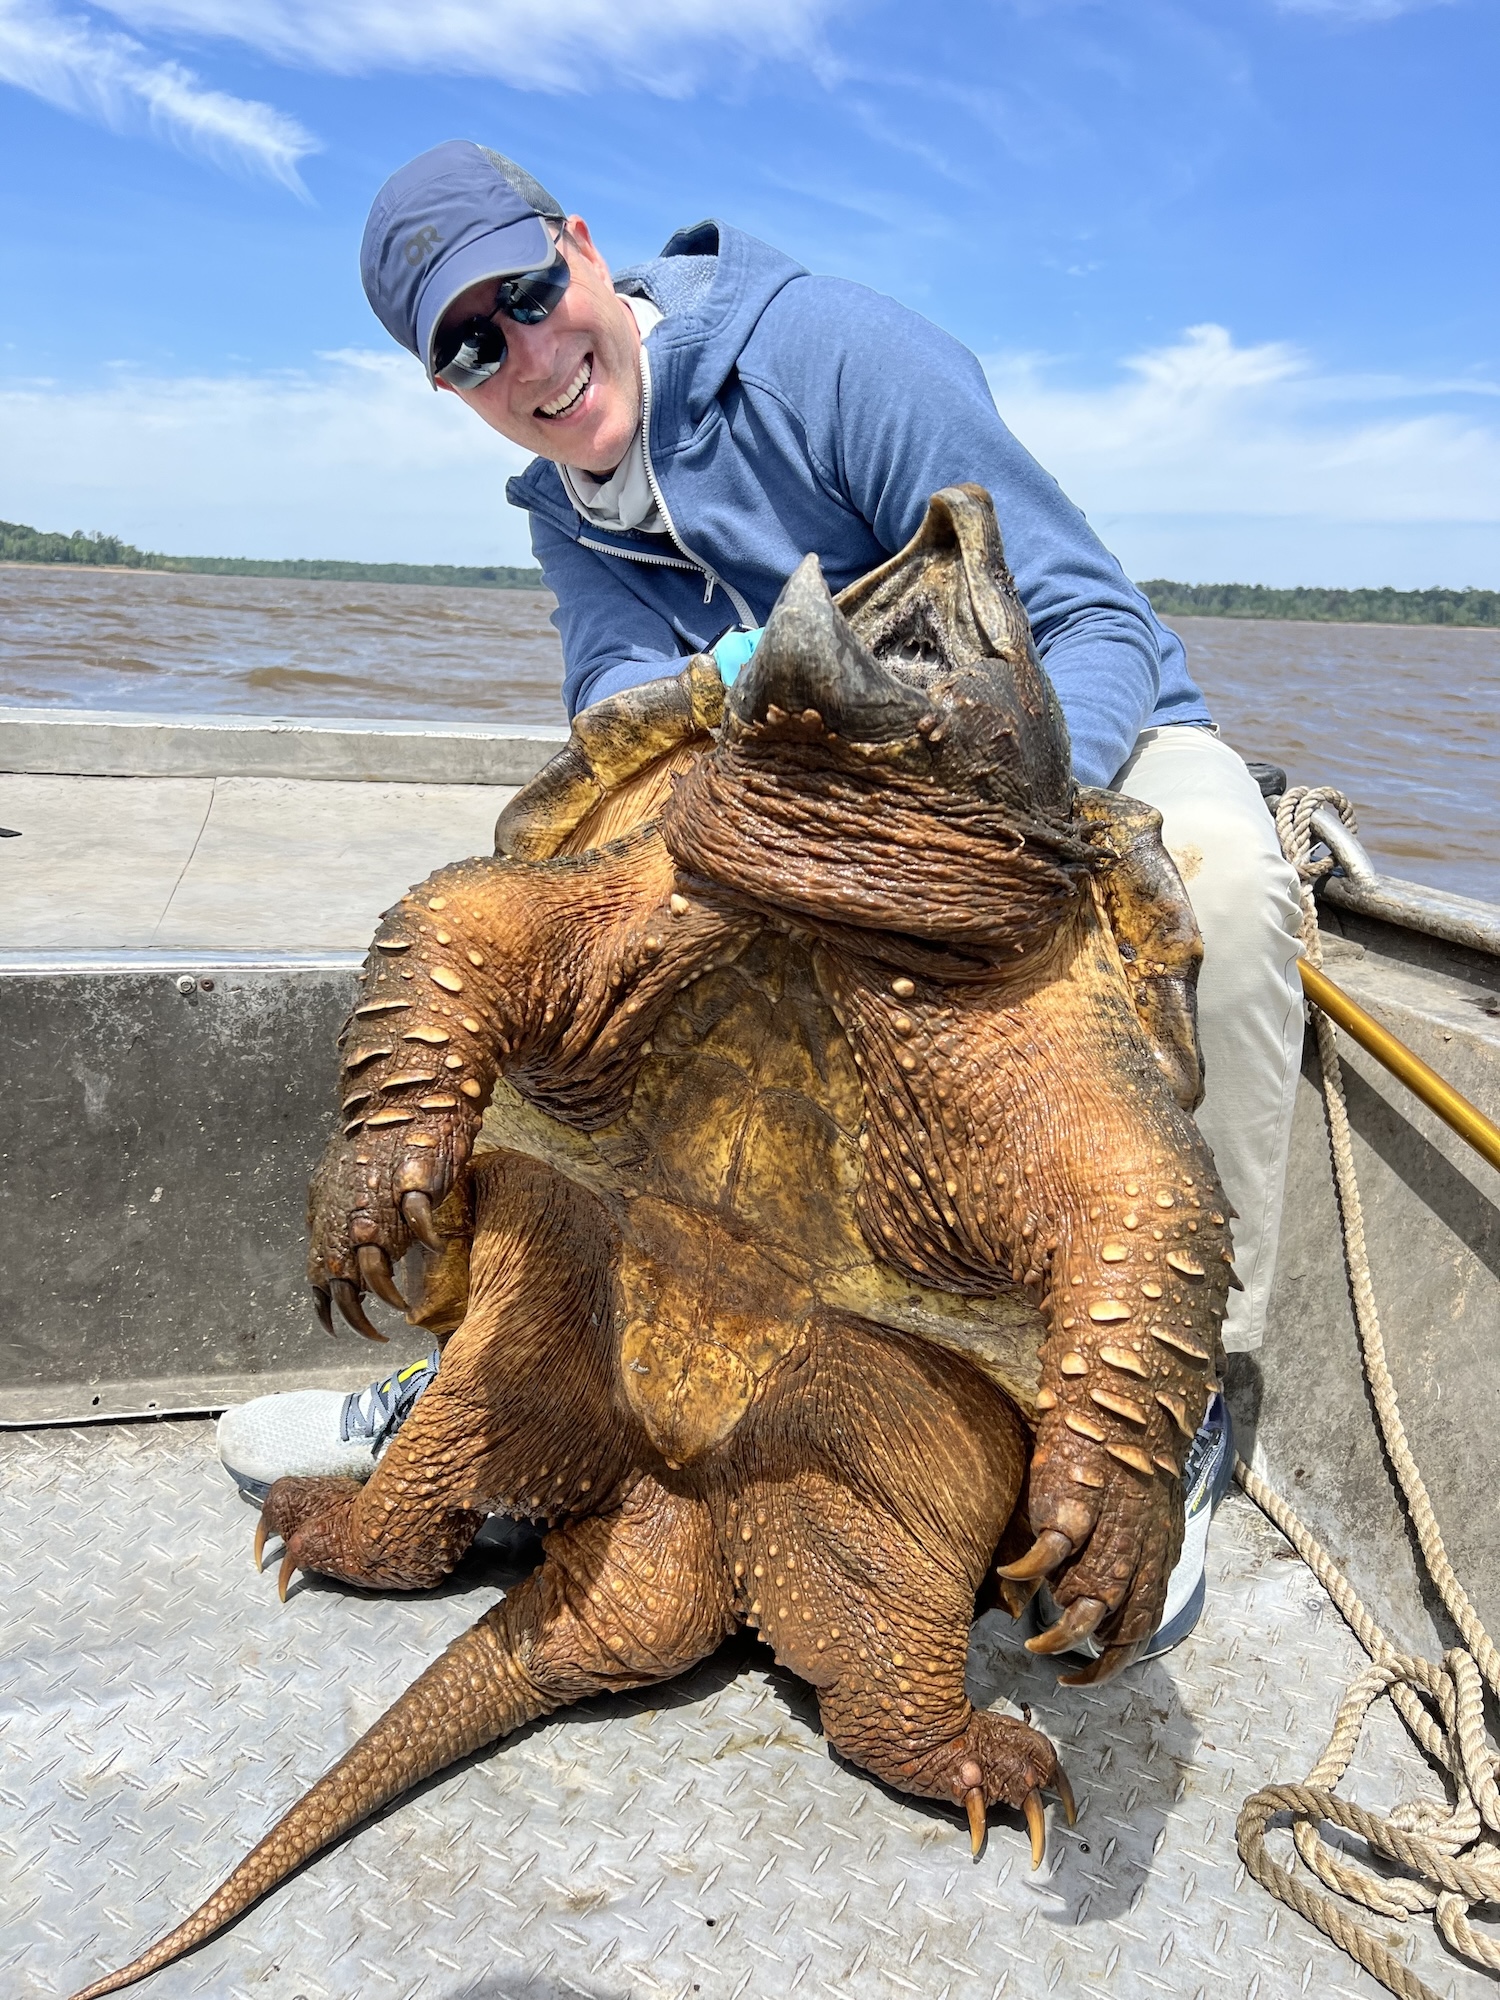 Angler with an enormous alligator snapping turtle.